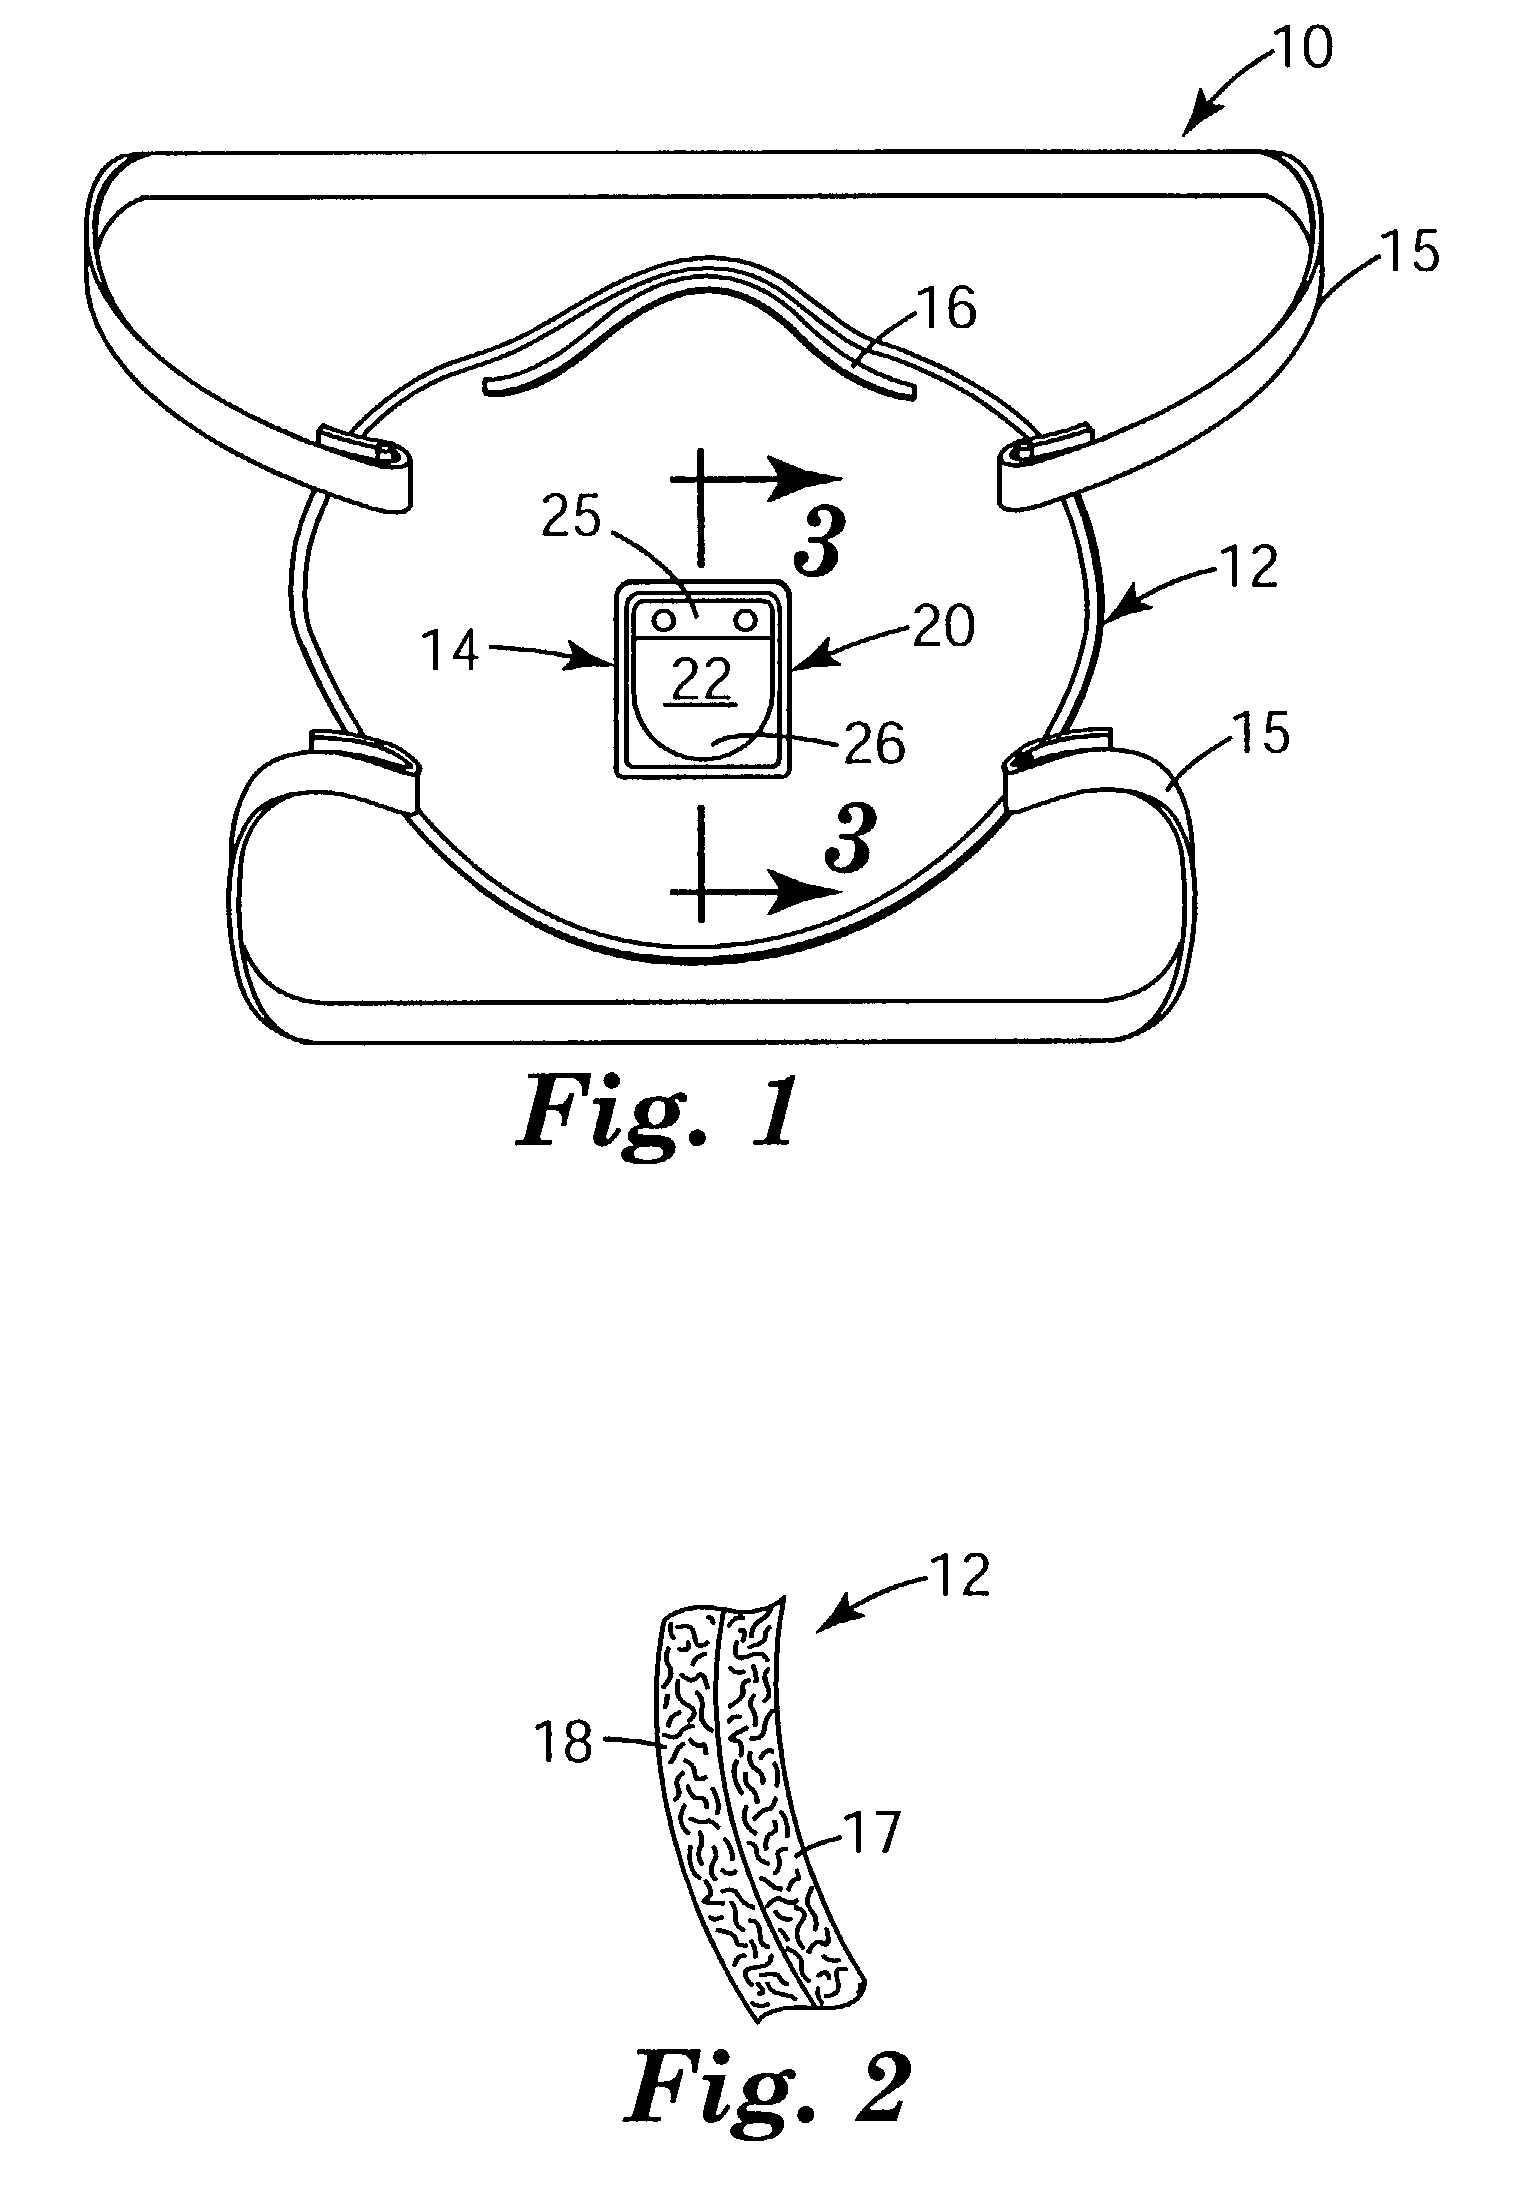 Filtering face mask that has a resilient seal surface in its exhalation valve